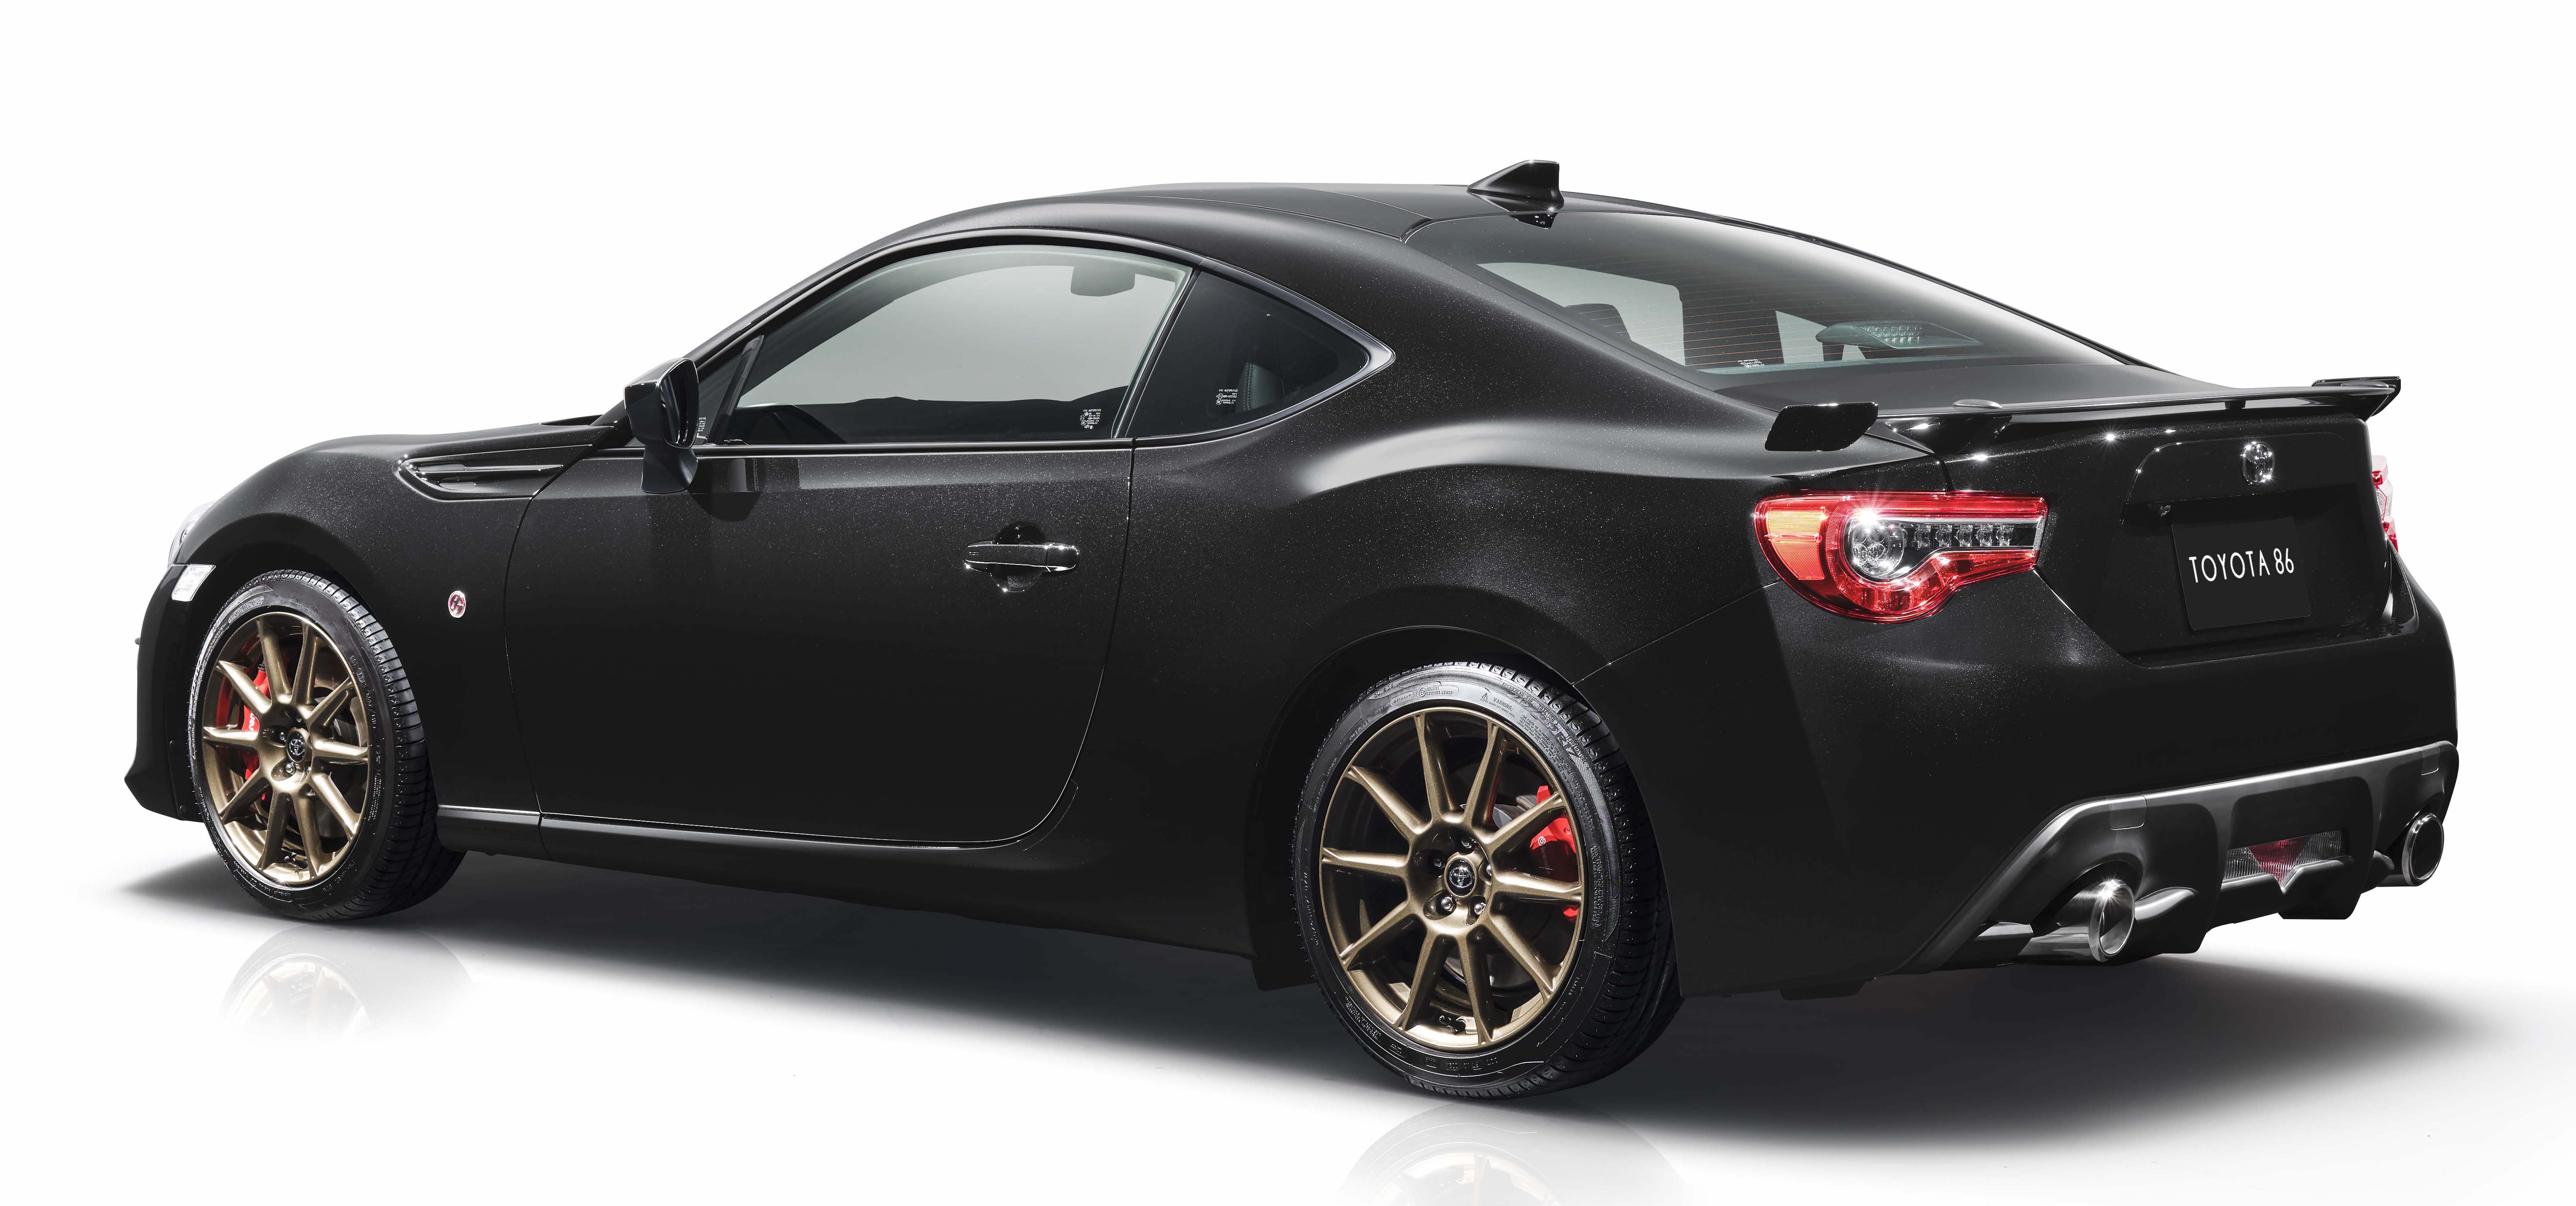 Toyota 86 GT Black Limited 86unit farewell edition Toyota 86 GT